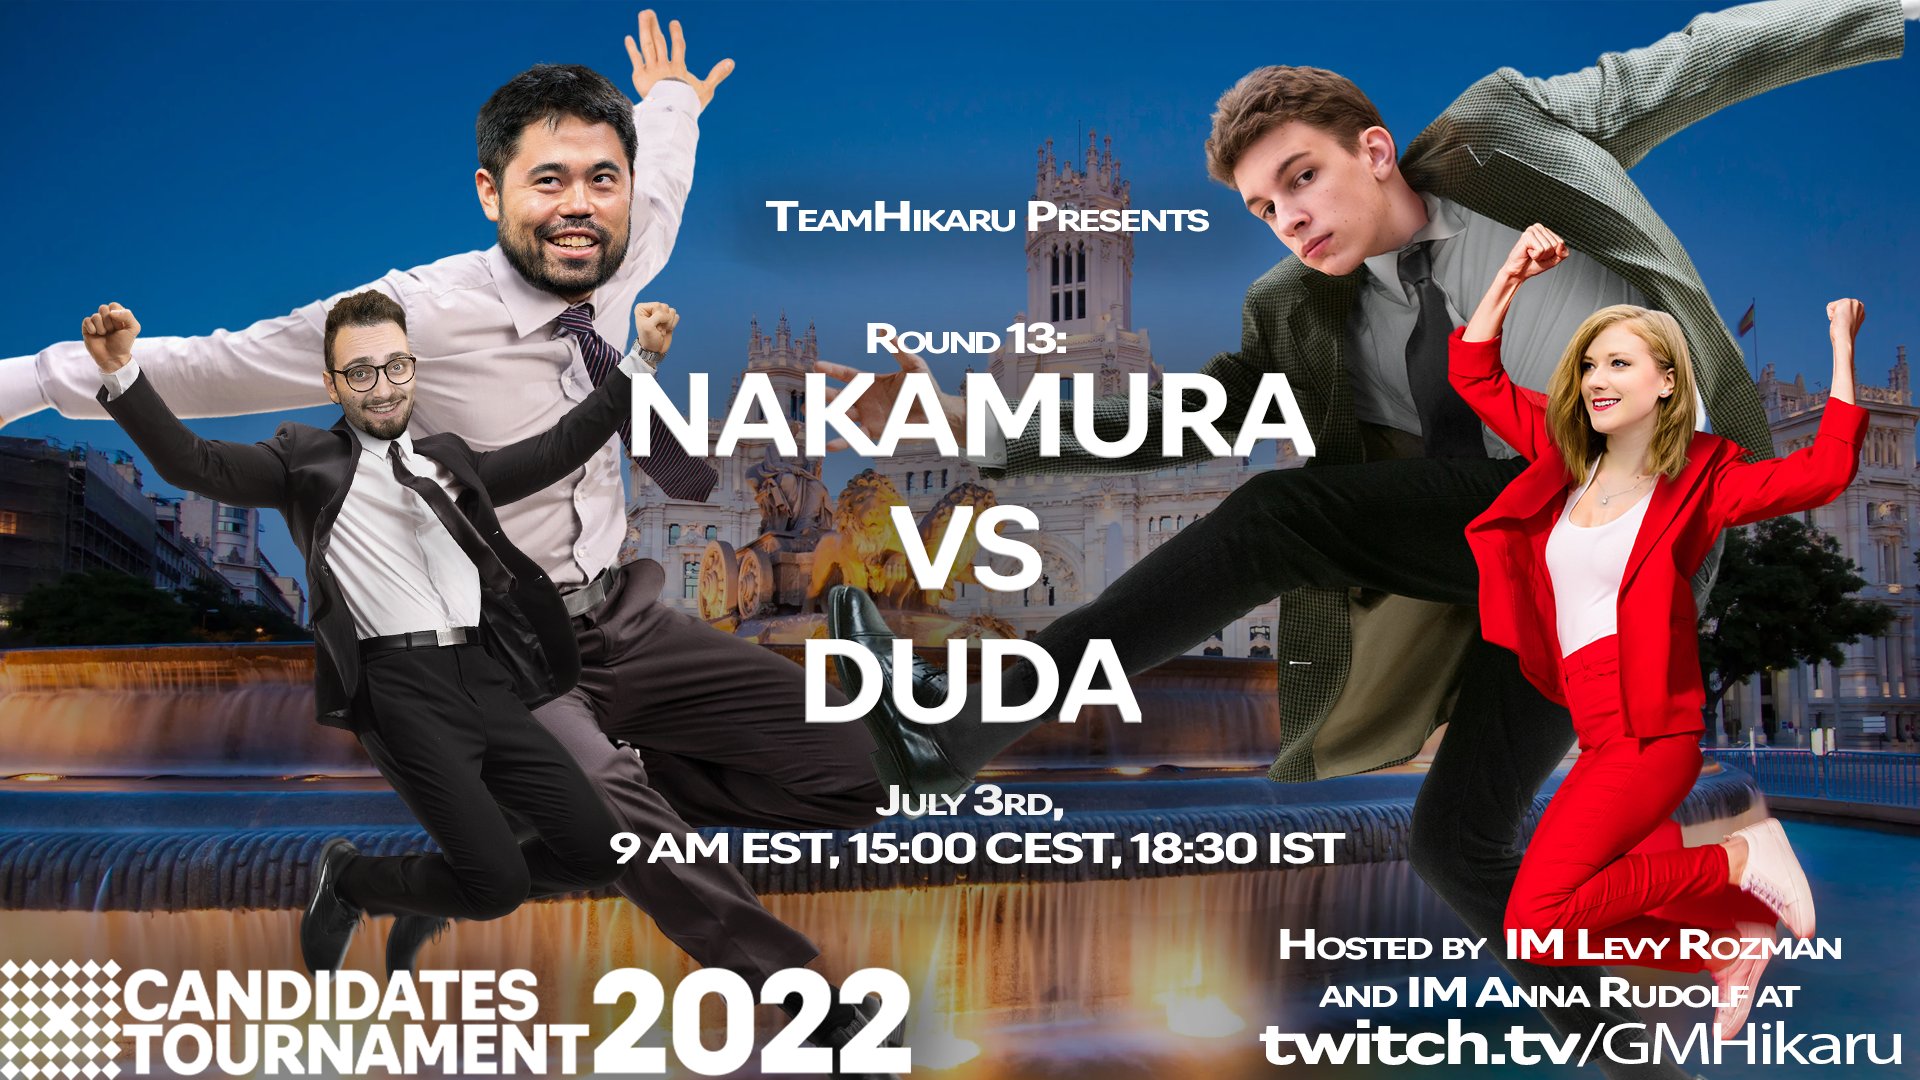 Hikaru Nakamura on X: Getting ready to stream and the plan will be to run  a Sub Battle vs Levy, aka @gothamchess - We do this to relax - or so we